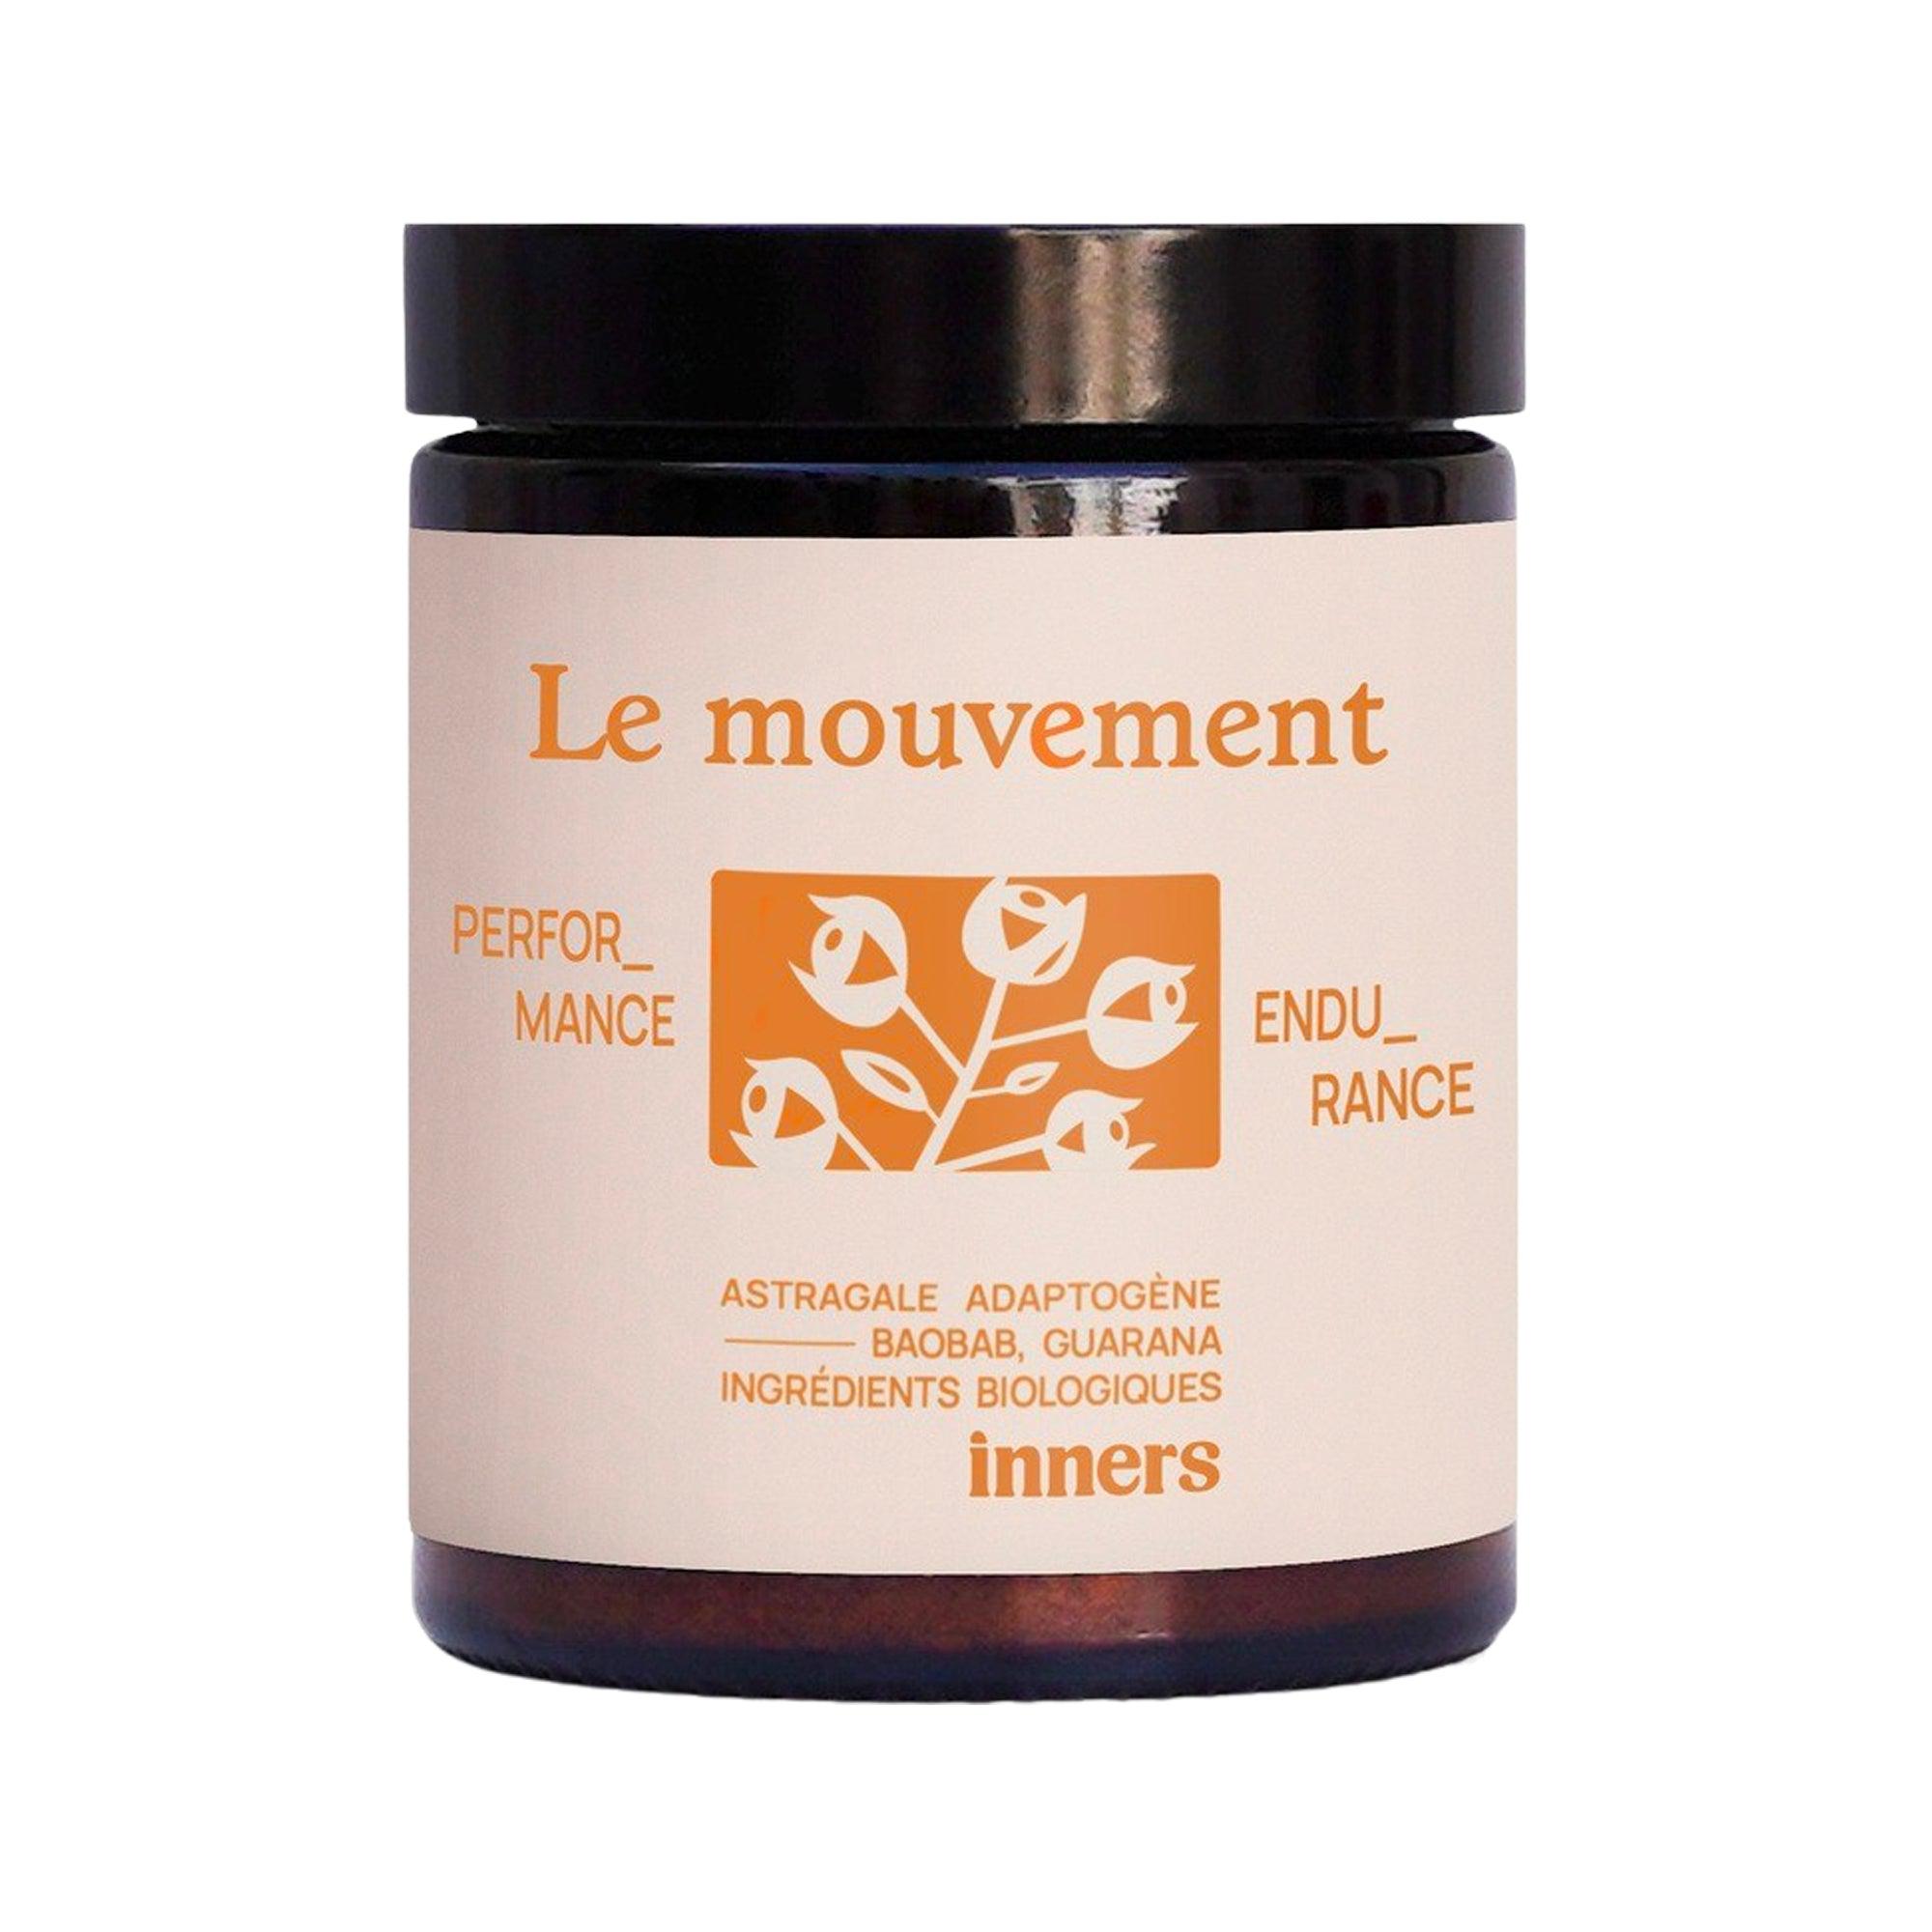 Indisponible - Le Mouvement : Performance + Endurance Indisponible - Le Mouvement : Performance + Endurance - Inners